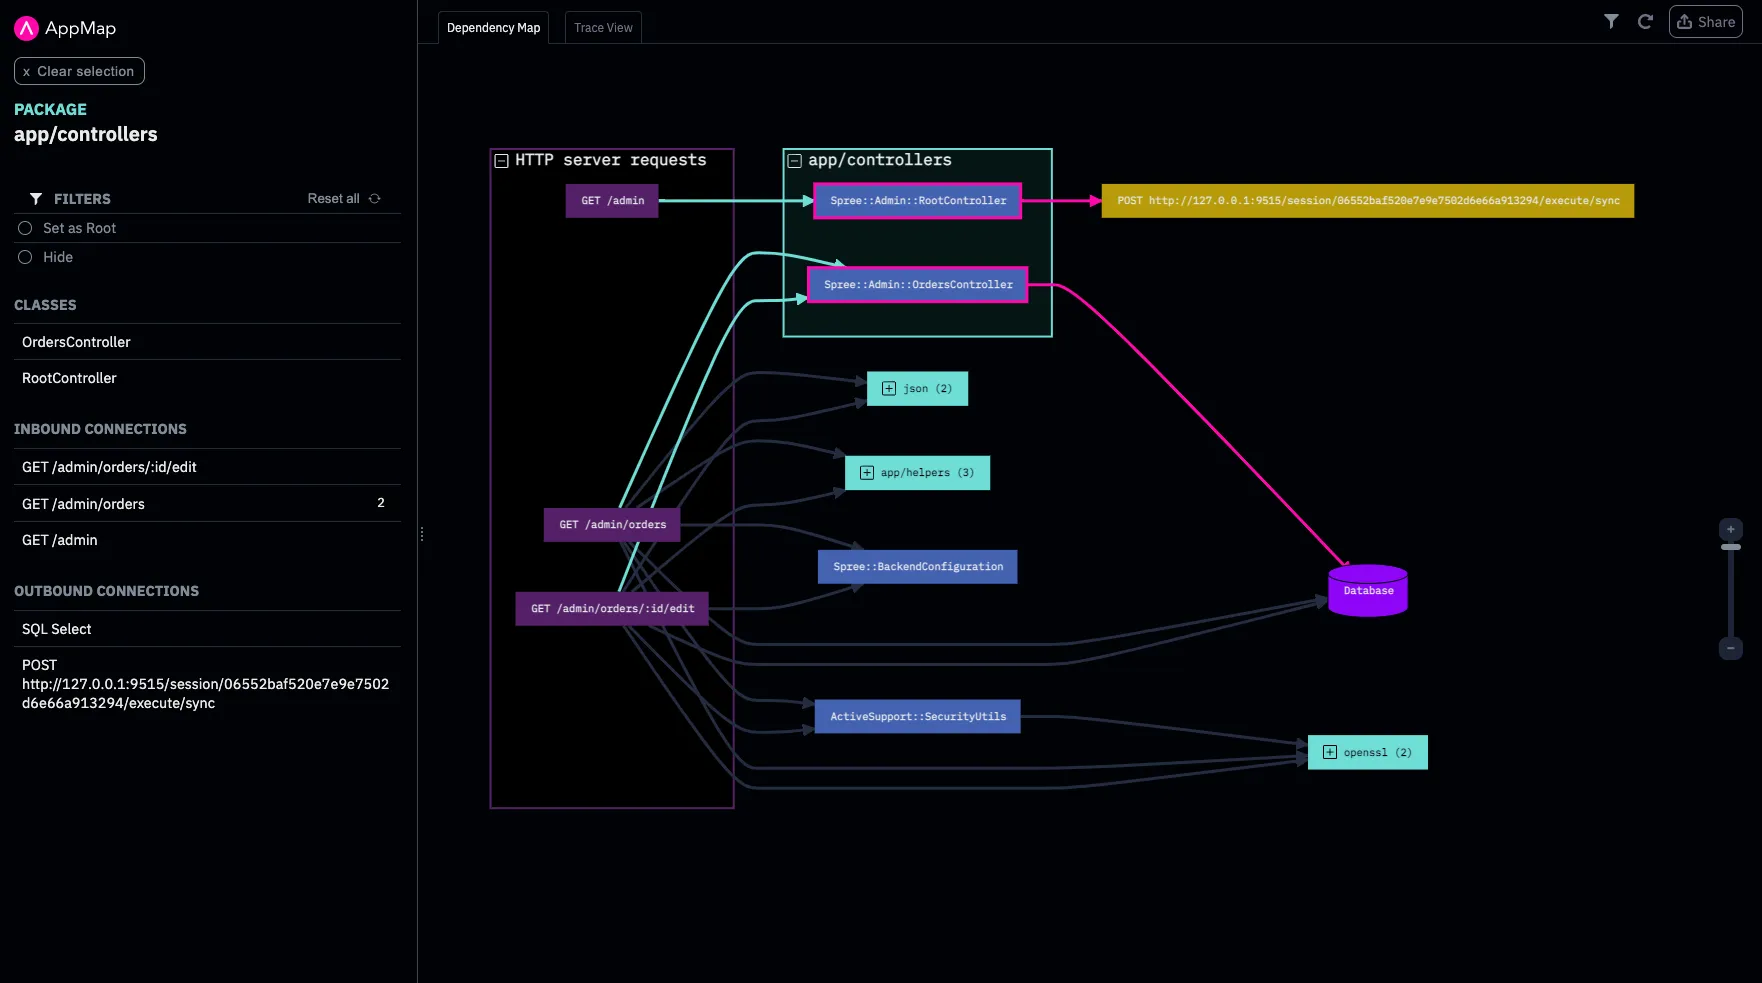 Dependency map overview